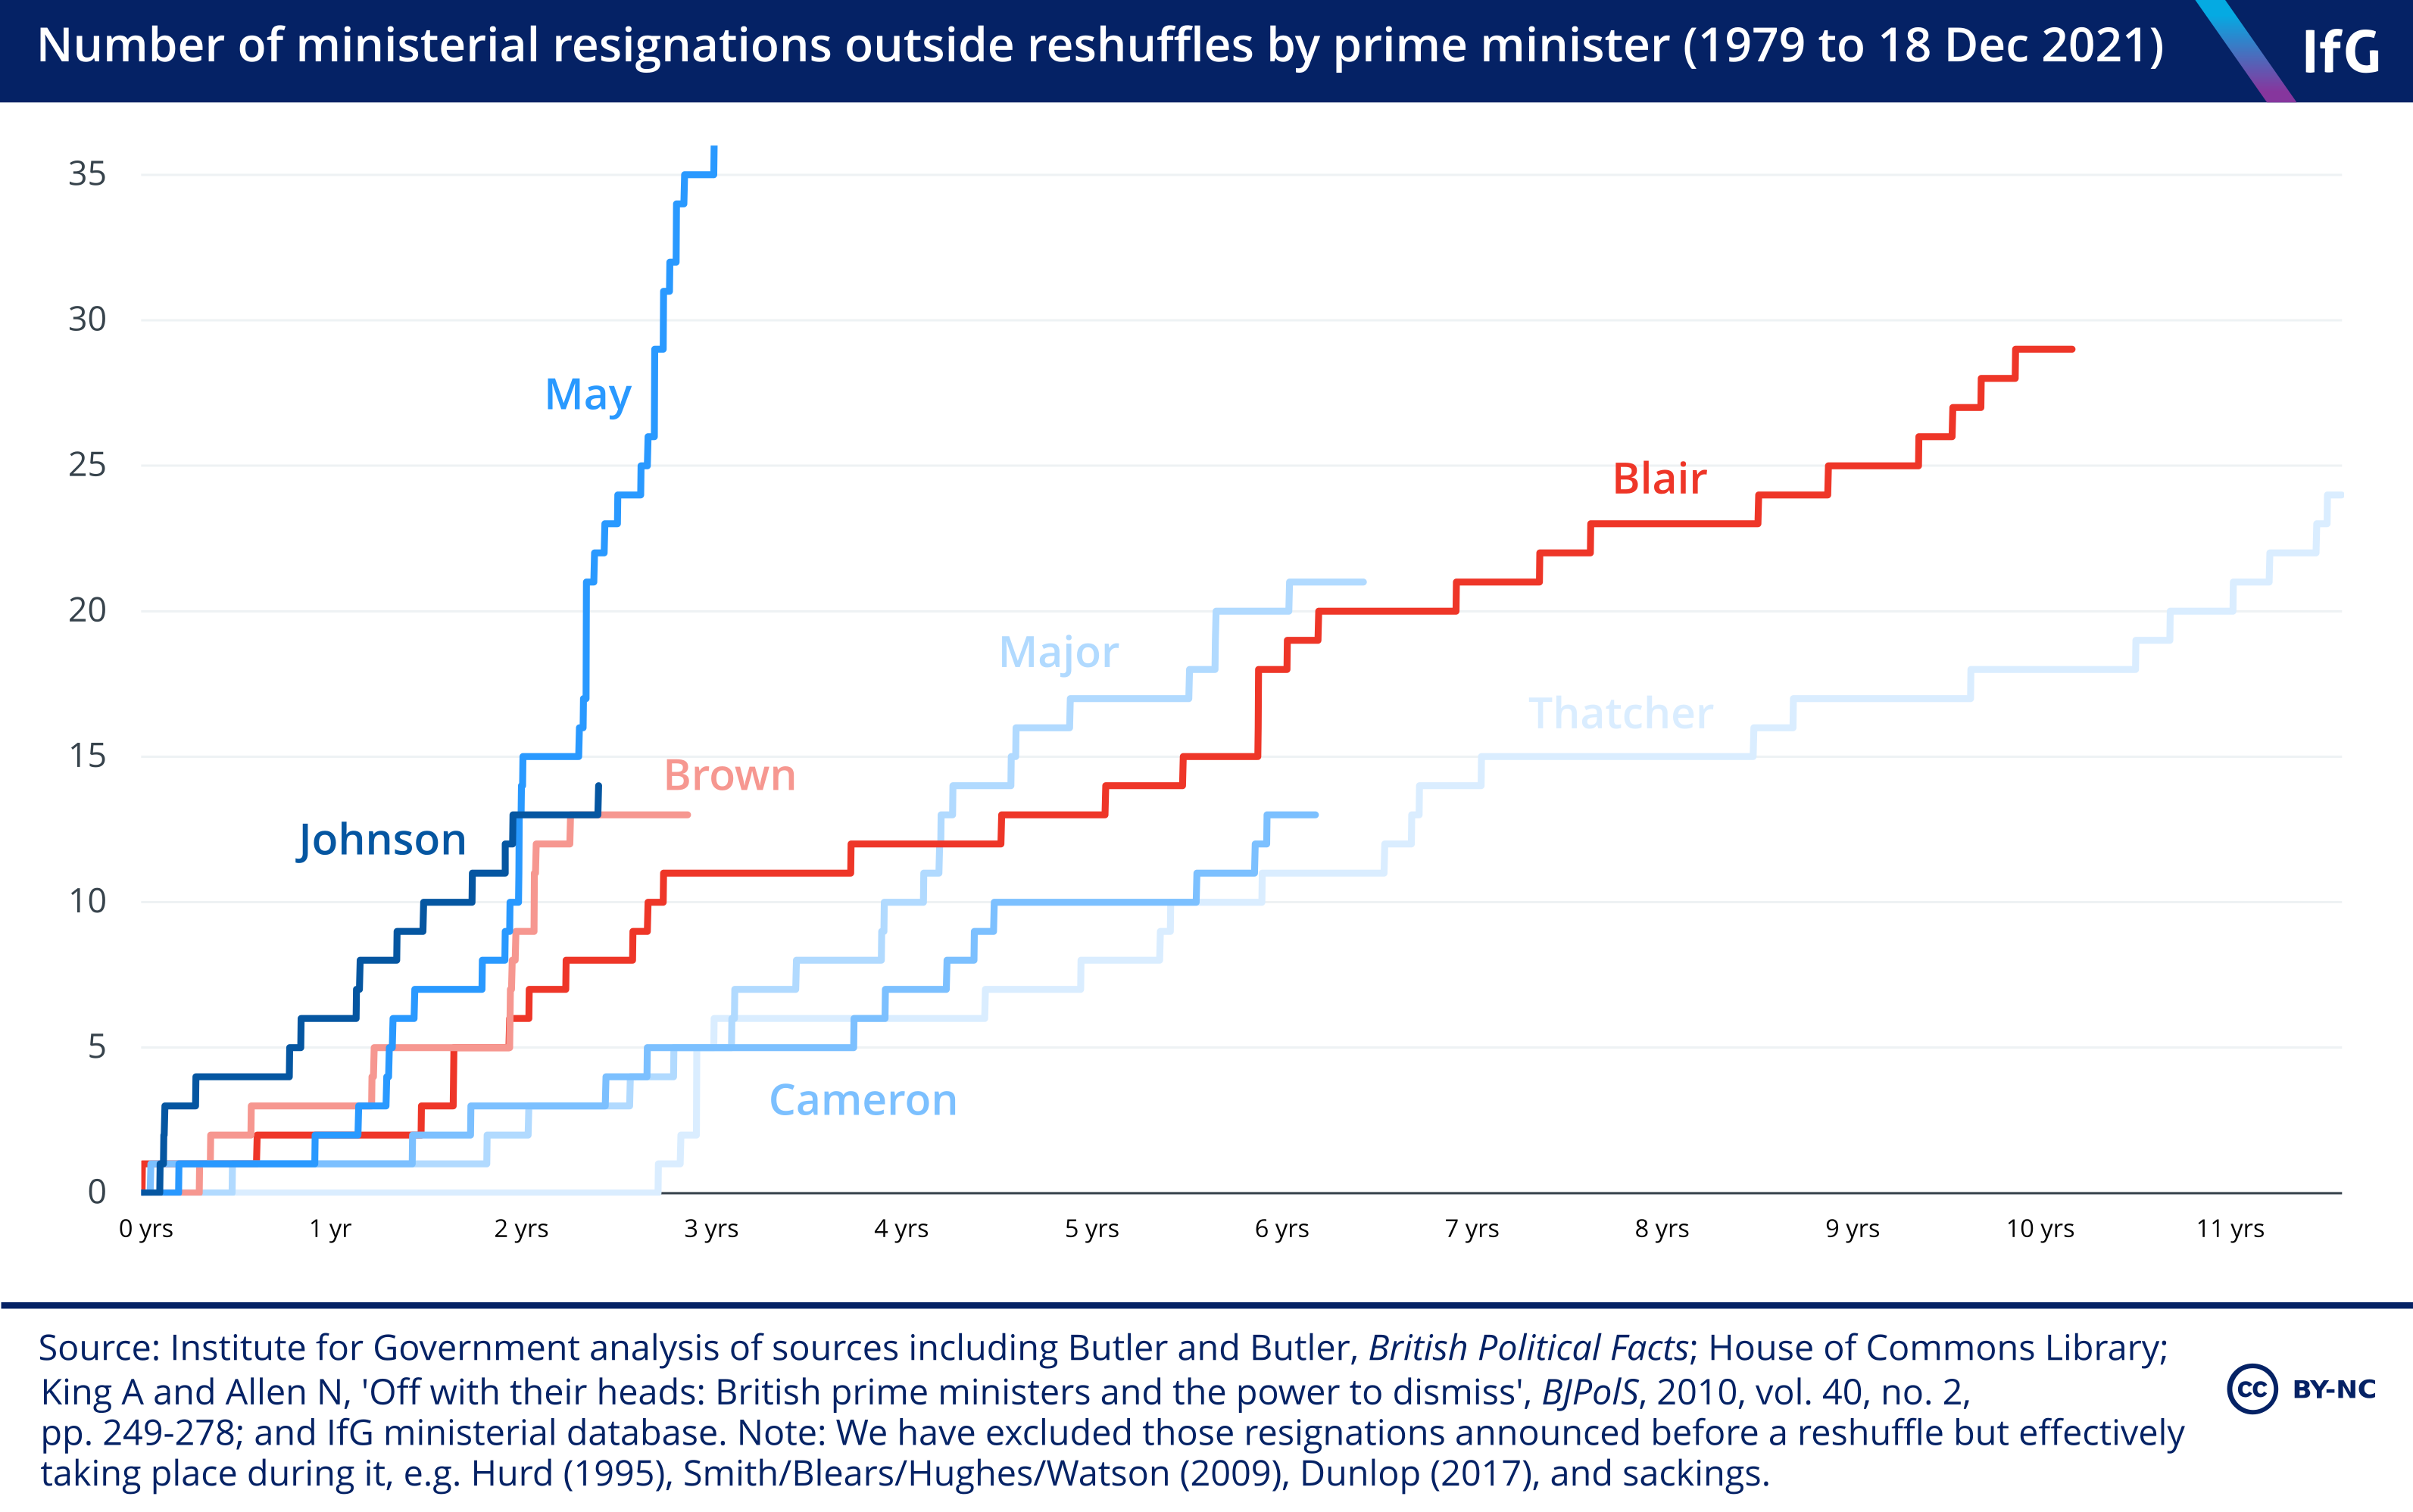 Number of ministerial resignations outside reshuffles by PM